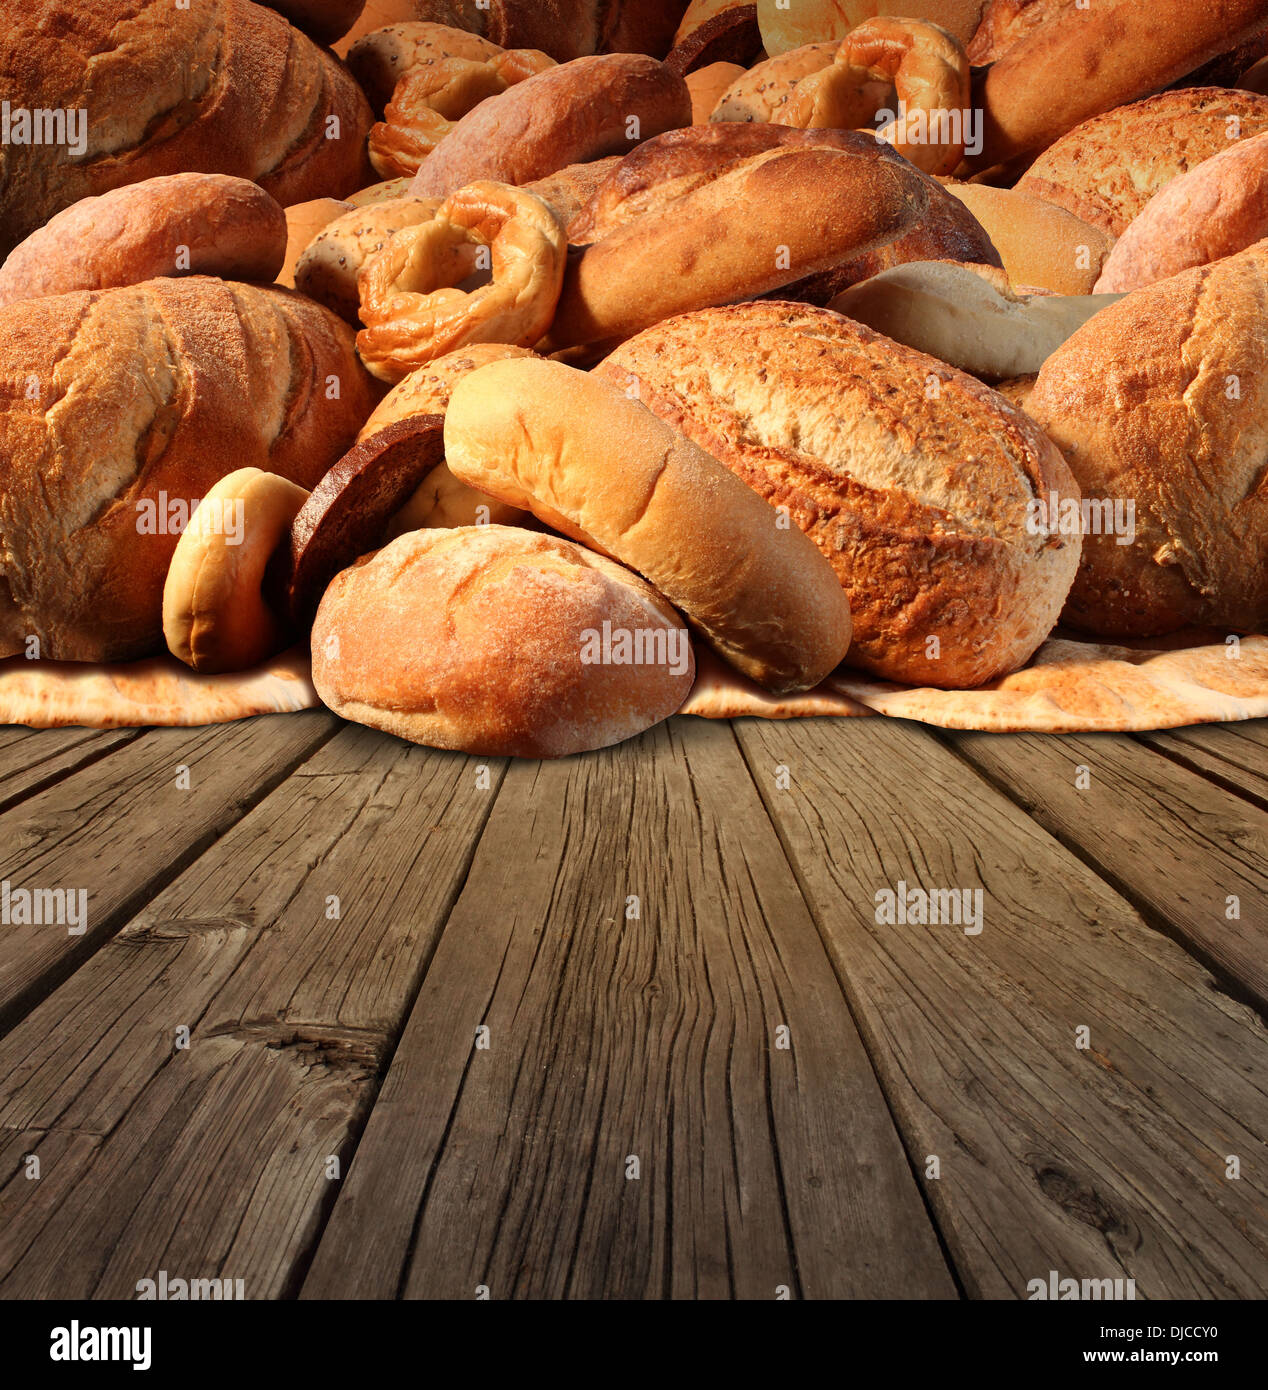 Bakery bread food concept on an old fashioned wood table background with a group of baked goods made from whole wheat and natural grains with international breads as pumpernickel pita focaccia bagel and french baguette. Stock Photo